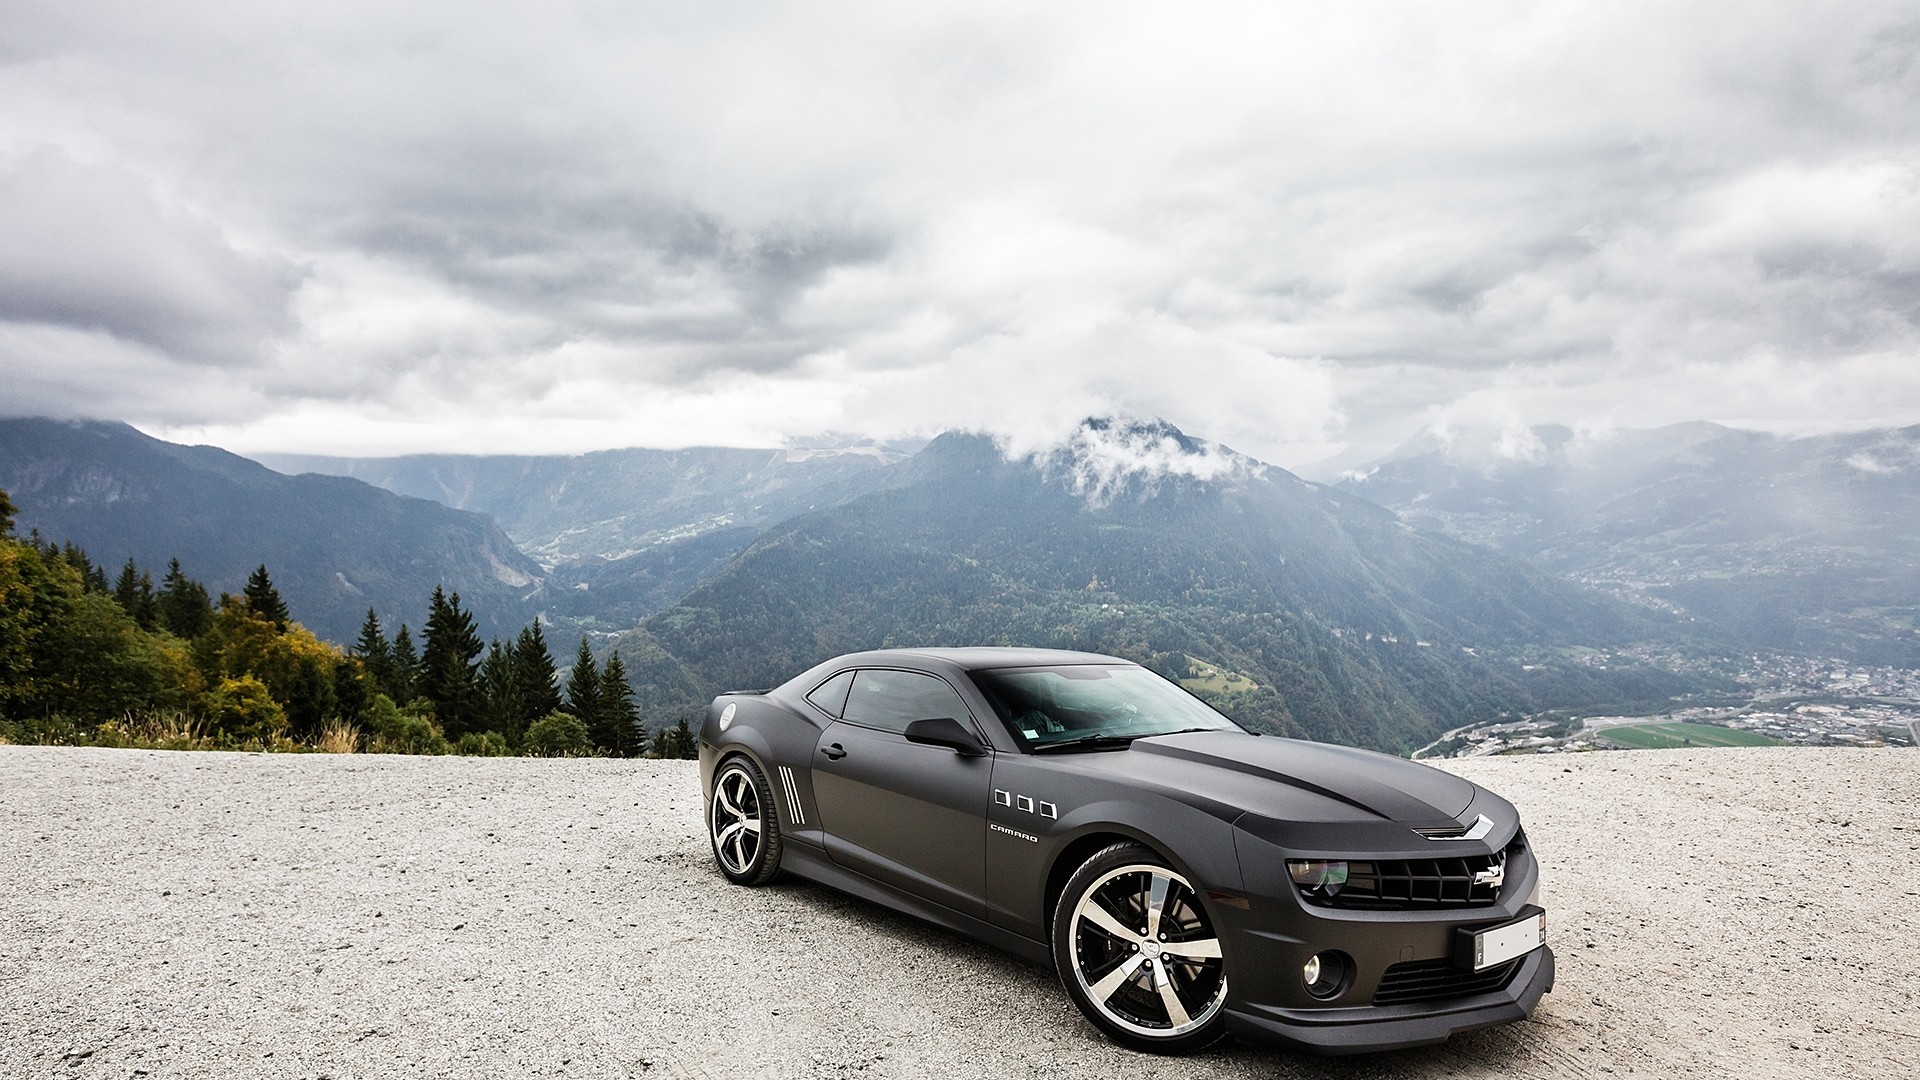 General 1920x1080 Chevrolet Camaro mountains car vehicle black cars Chevrolet muscle cars American cars